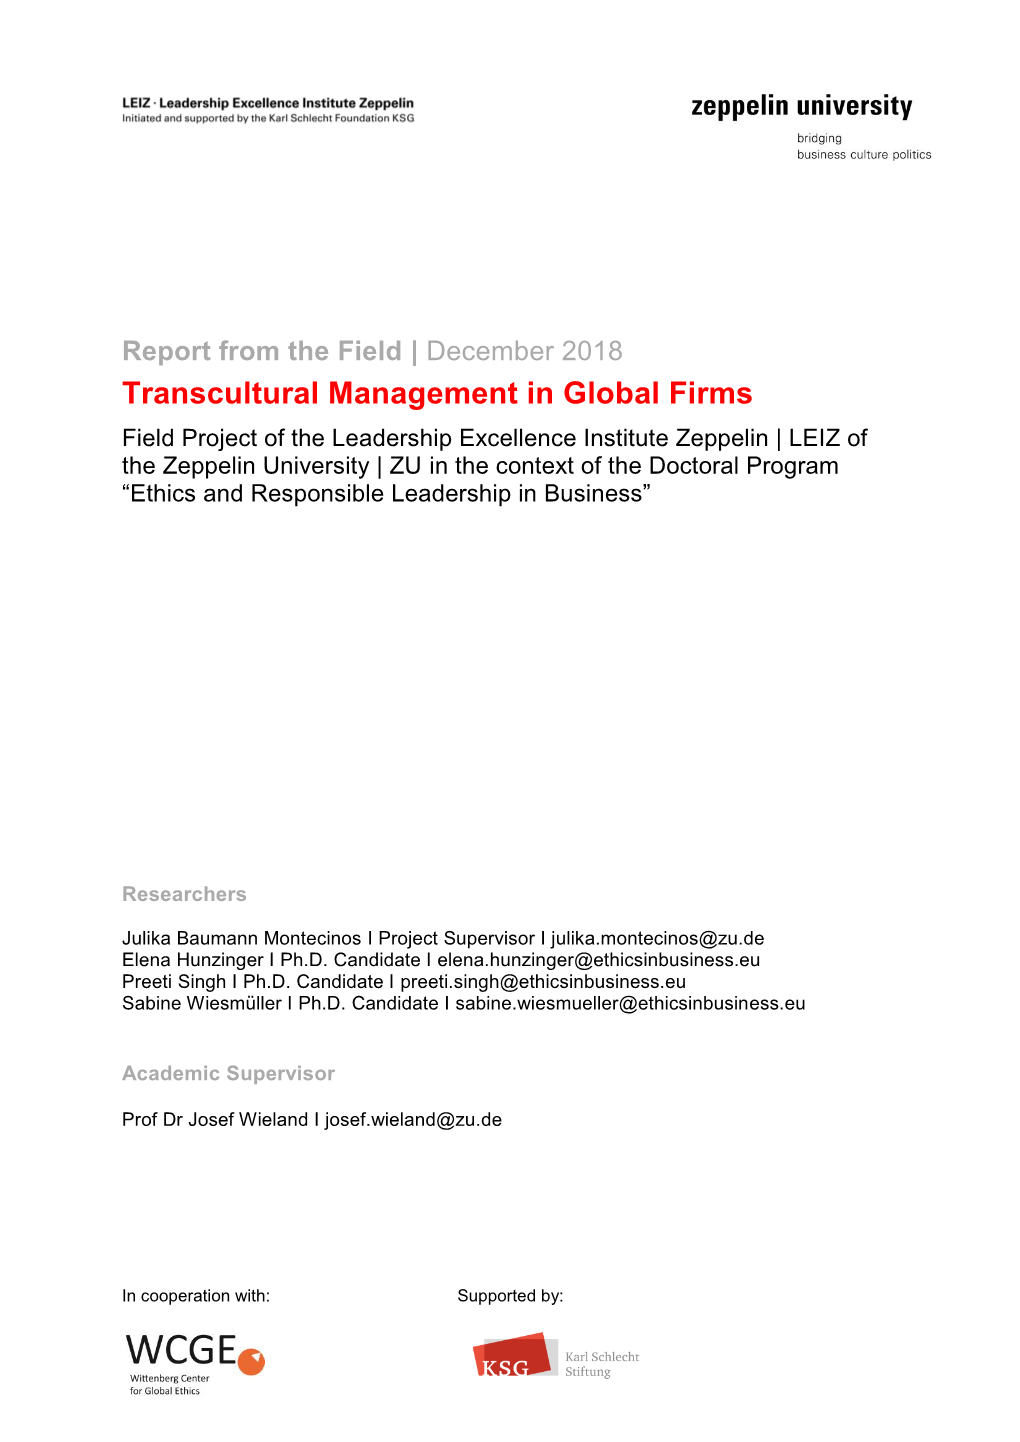 Transcultural Management in Global Firms